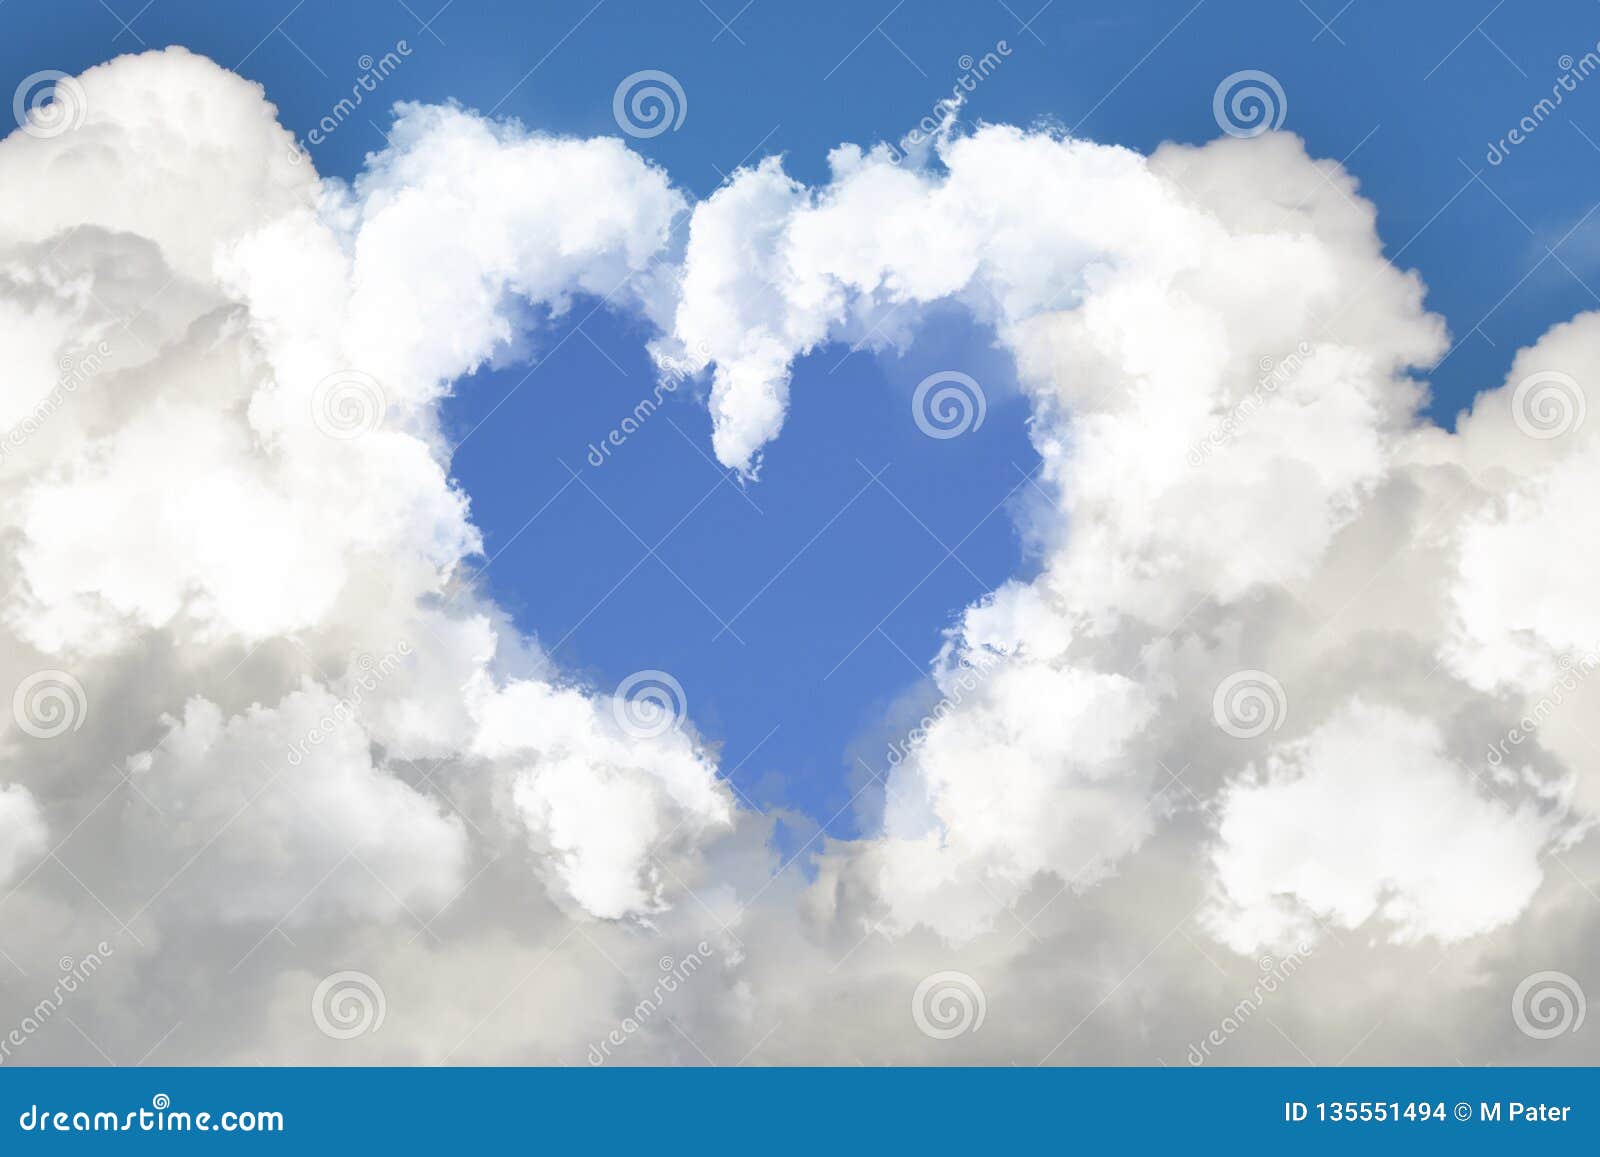 Heart Cloud and Blue Sky Background Stock Photo - Image of symbol, love:  135551494